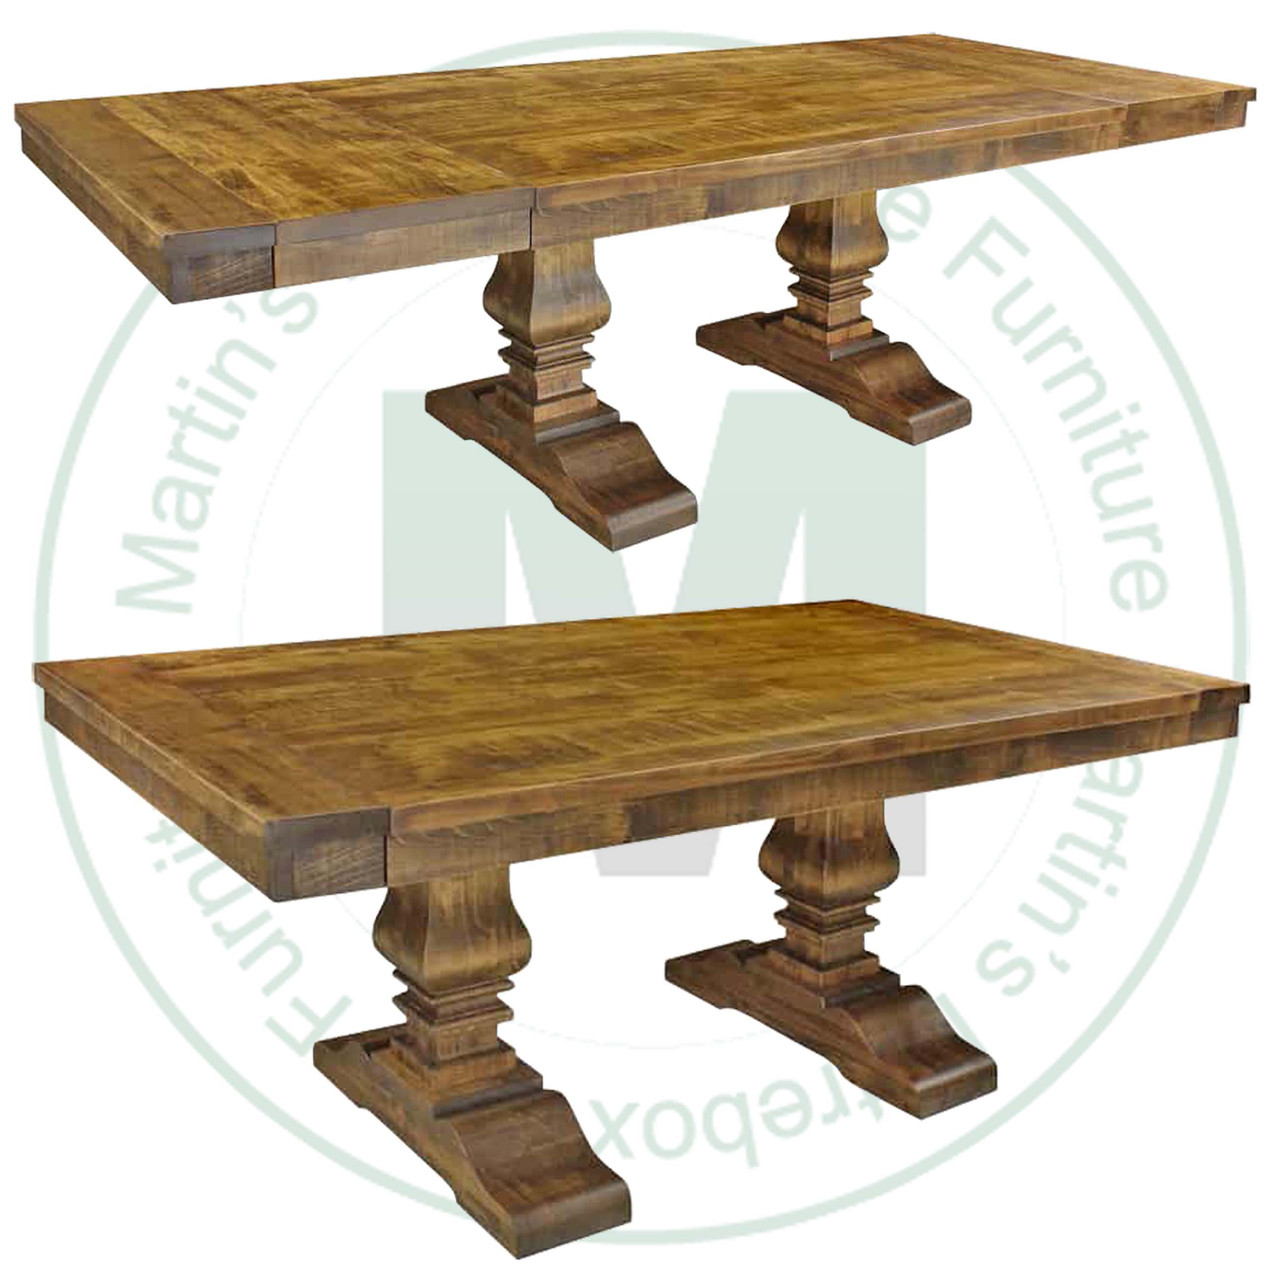 Maple Century Solid Top Double Pedestal Table 48''D x 84''W x 30''H With 2 - 16'' Leaves